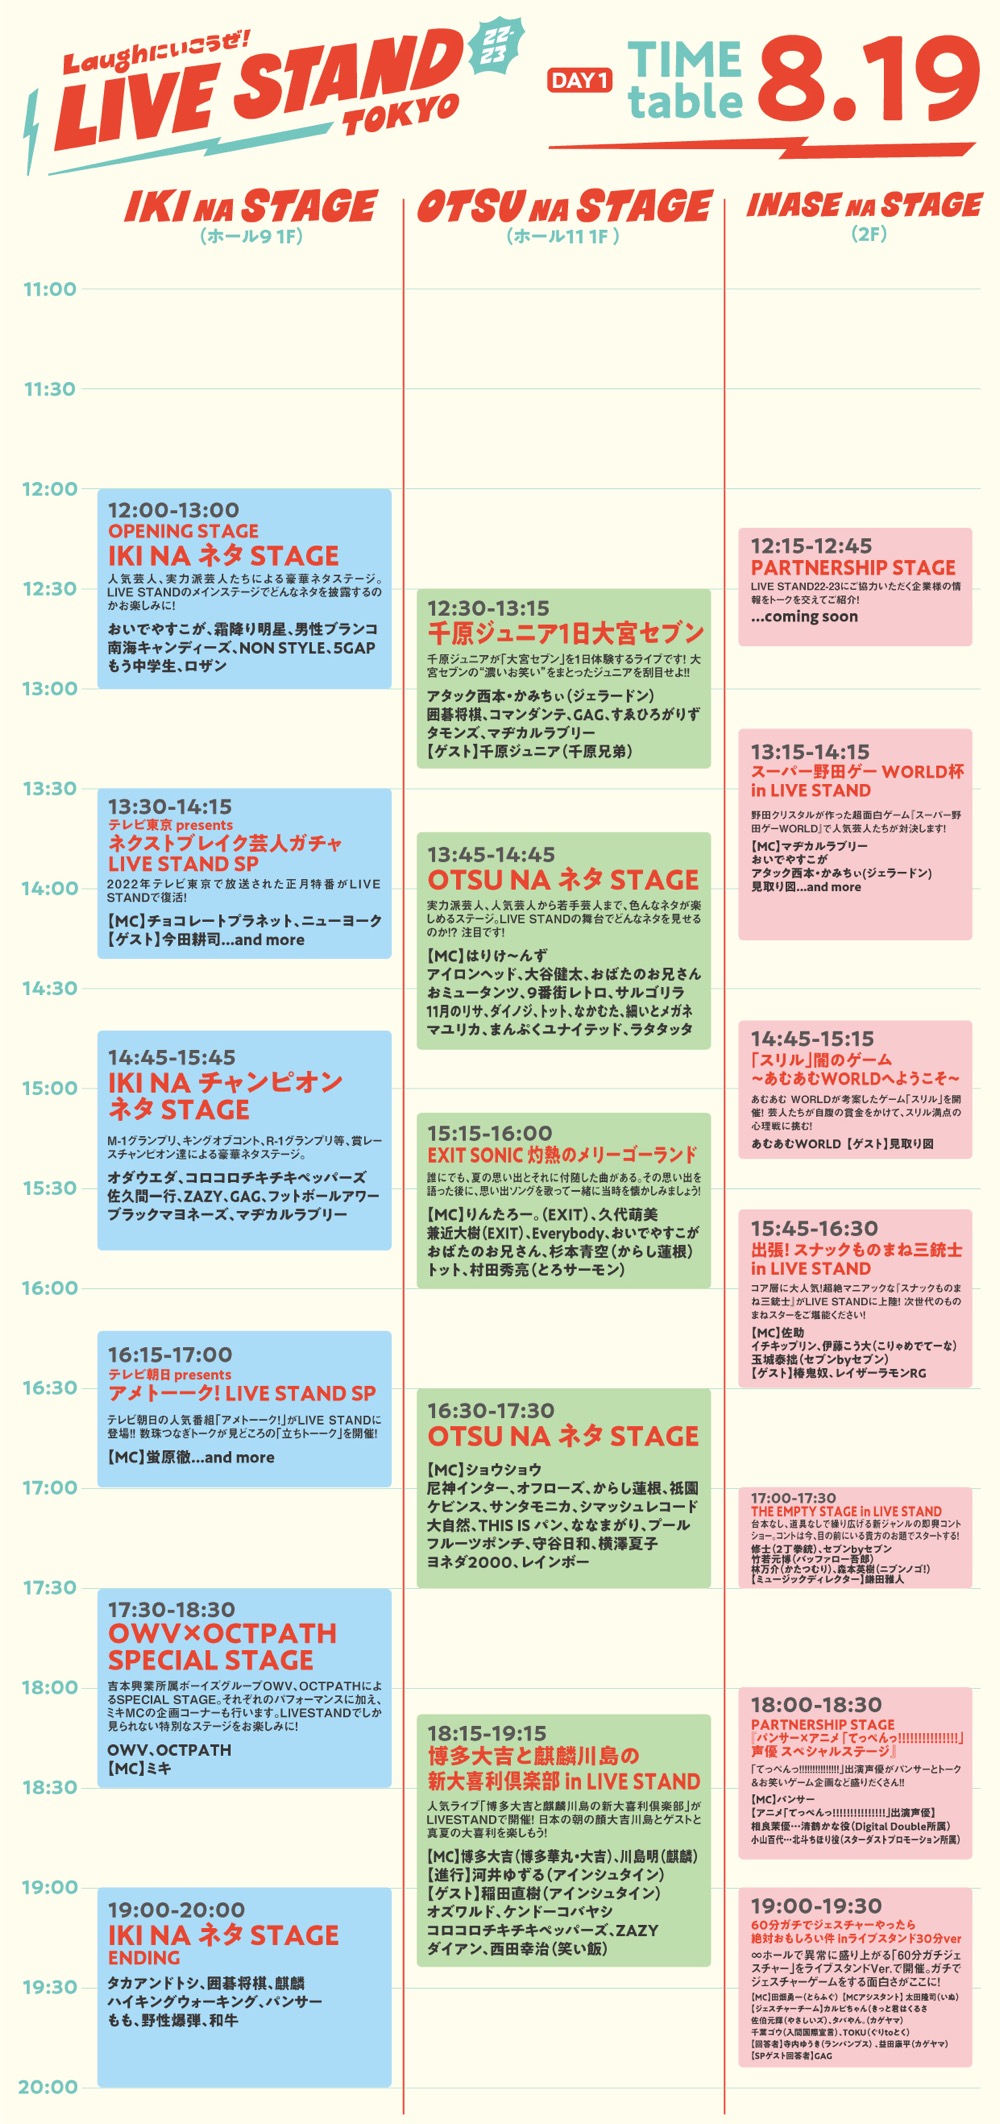 OWV＆OCTPATH、お笑いフェス『LIVE STAND 22-23 TOKYO』に参戦決定 - 画像一覧（3/5）